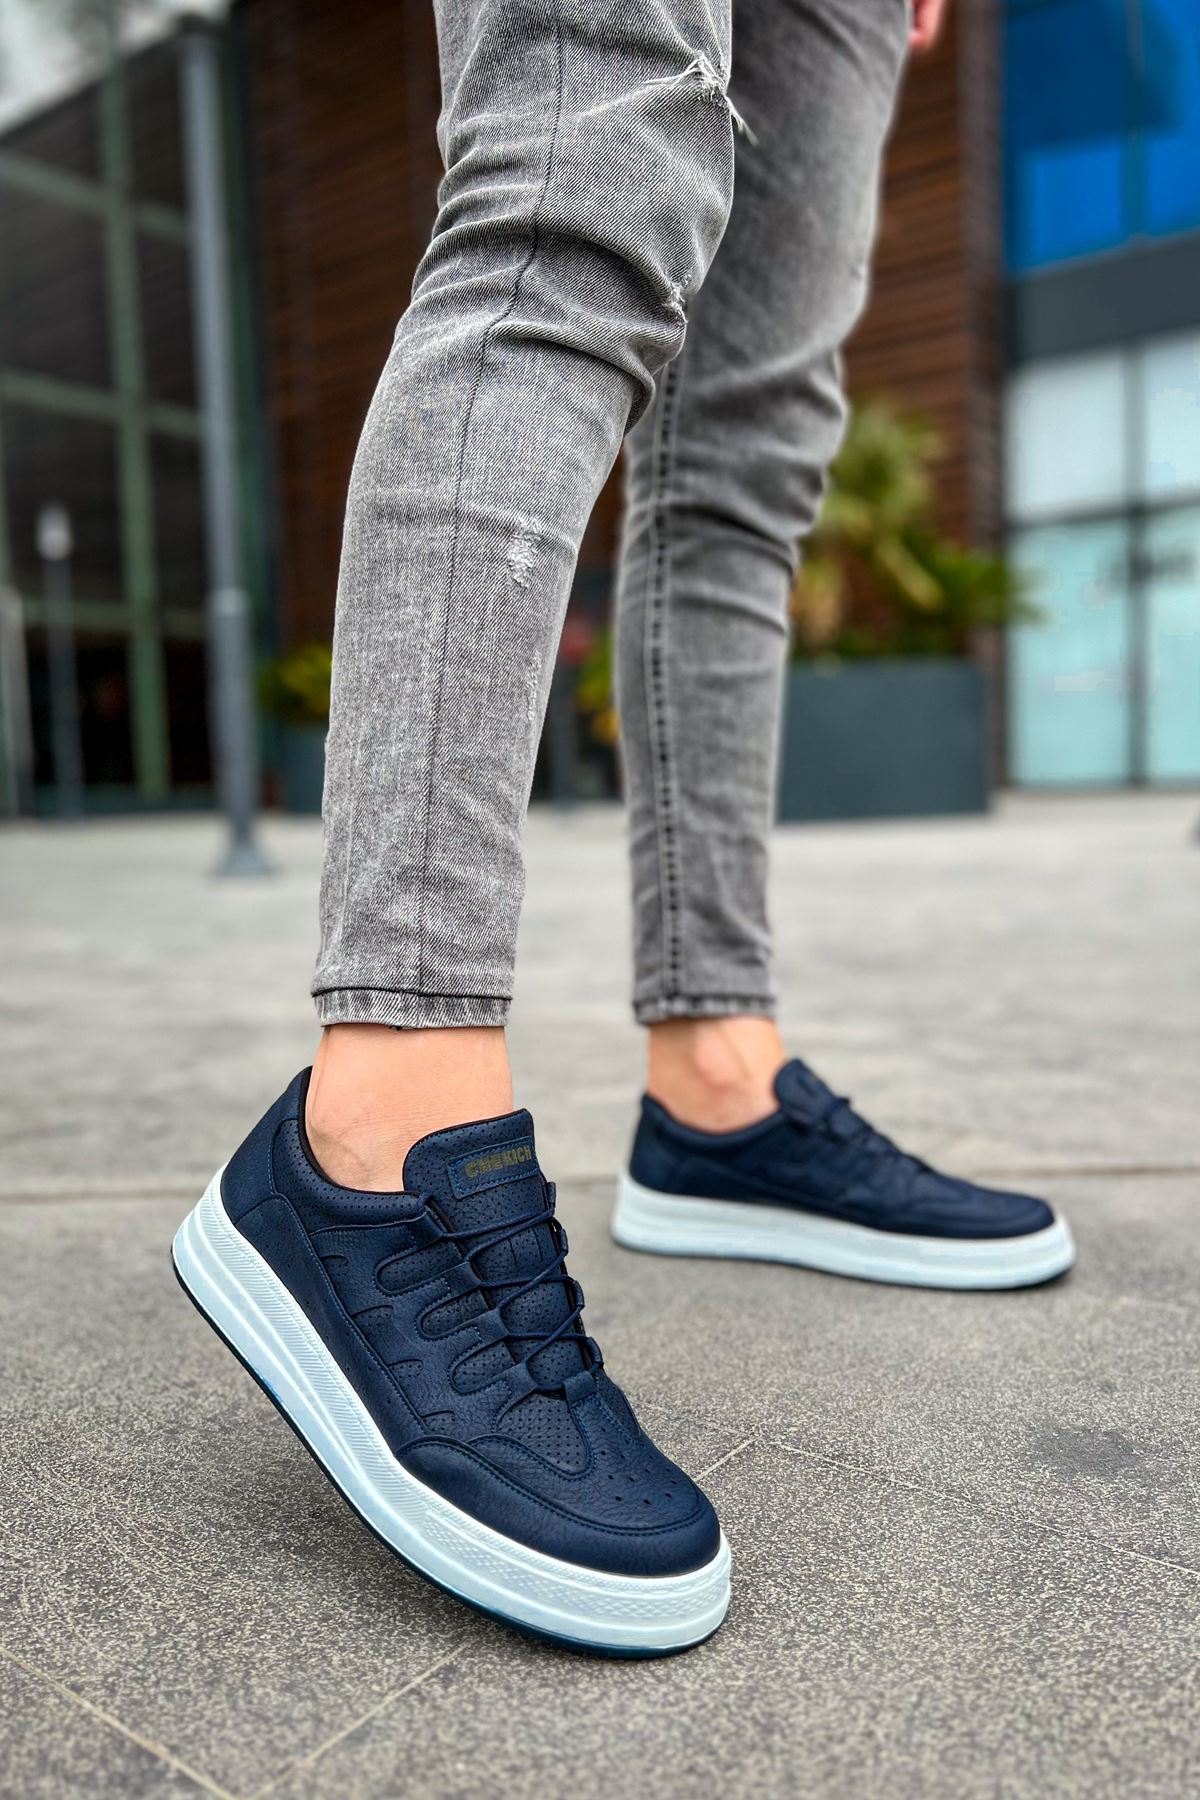 CH040 Men's Unisex Orthopedics Navy Blue-White Sole Casual Sneaker Sports Shoes - STREETMODE ™